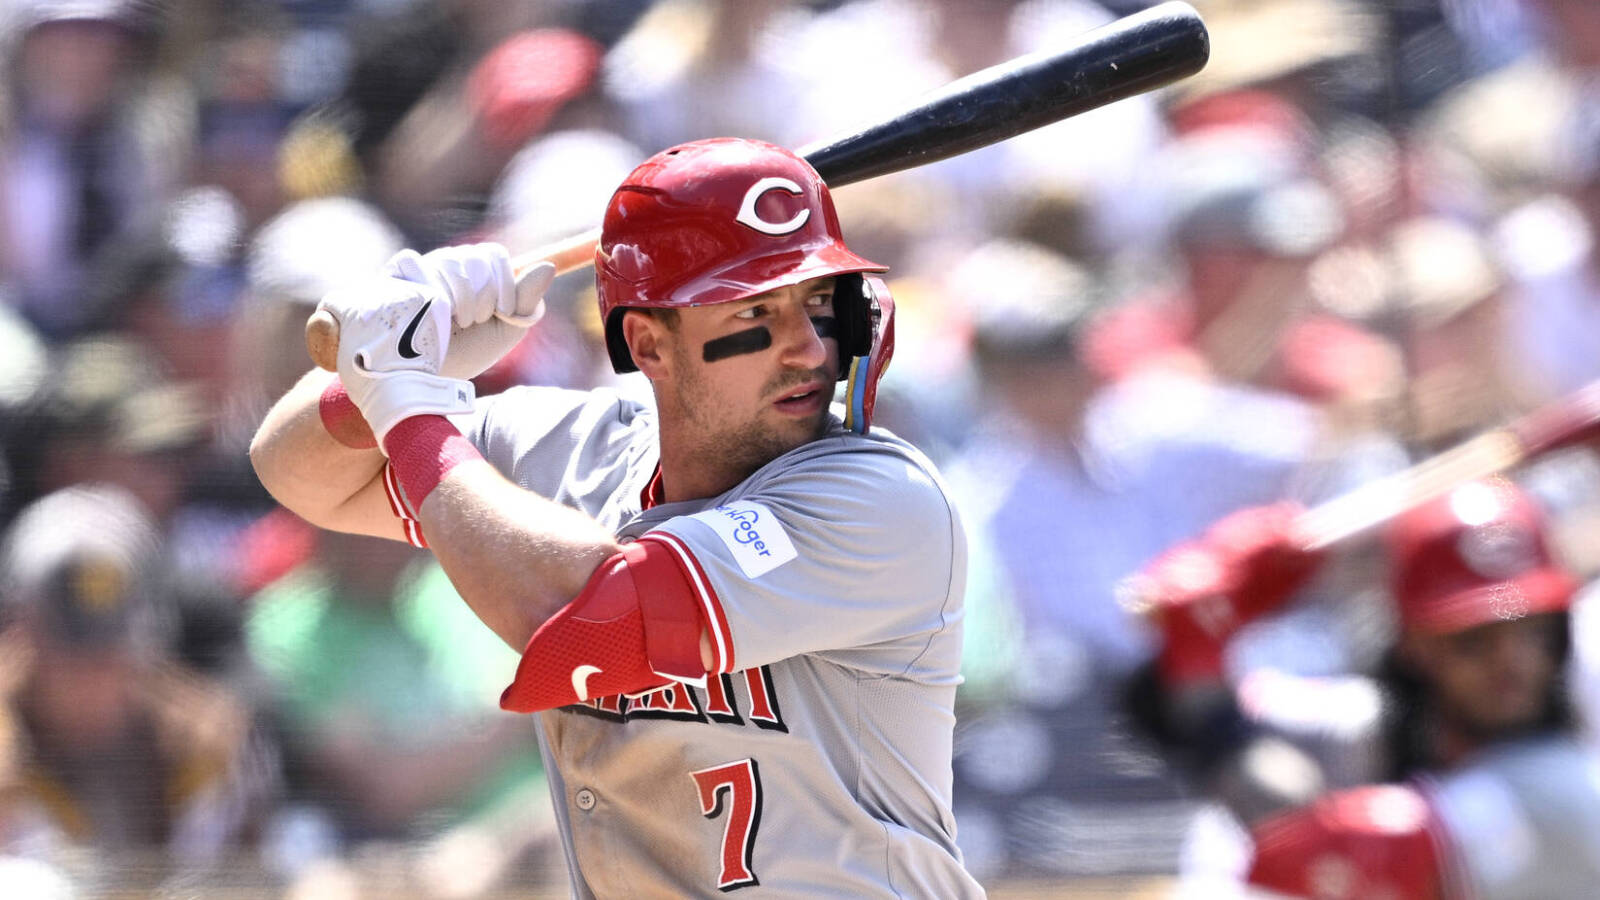 Reds' Spencer Steer hit a foul ball directly to one unlikely fan: 'It was pretty wild'